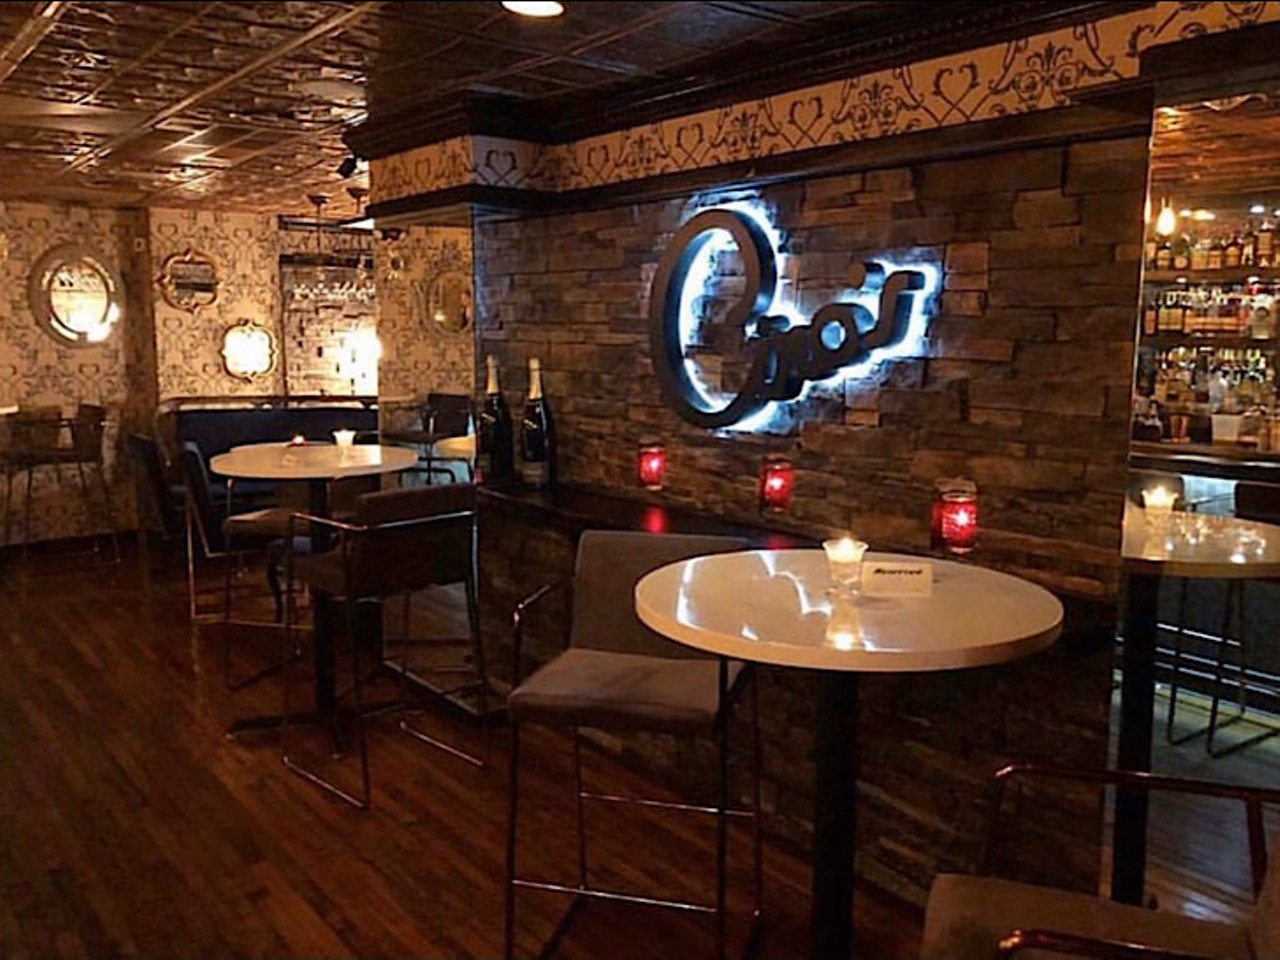 Ciro&#146;s
2109 Bayshore Blvd, Tampa, FL
Beware, you need a password to get into this hidden bar. This speakeasy can only be accessed via password where you'll be escorted to your "private" seating area complete with a curtain to keep things intimate.
Photo via Ciro&#146;s/Instagram